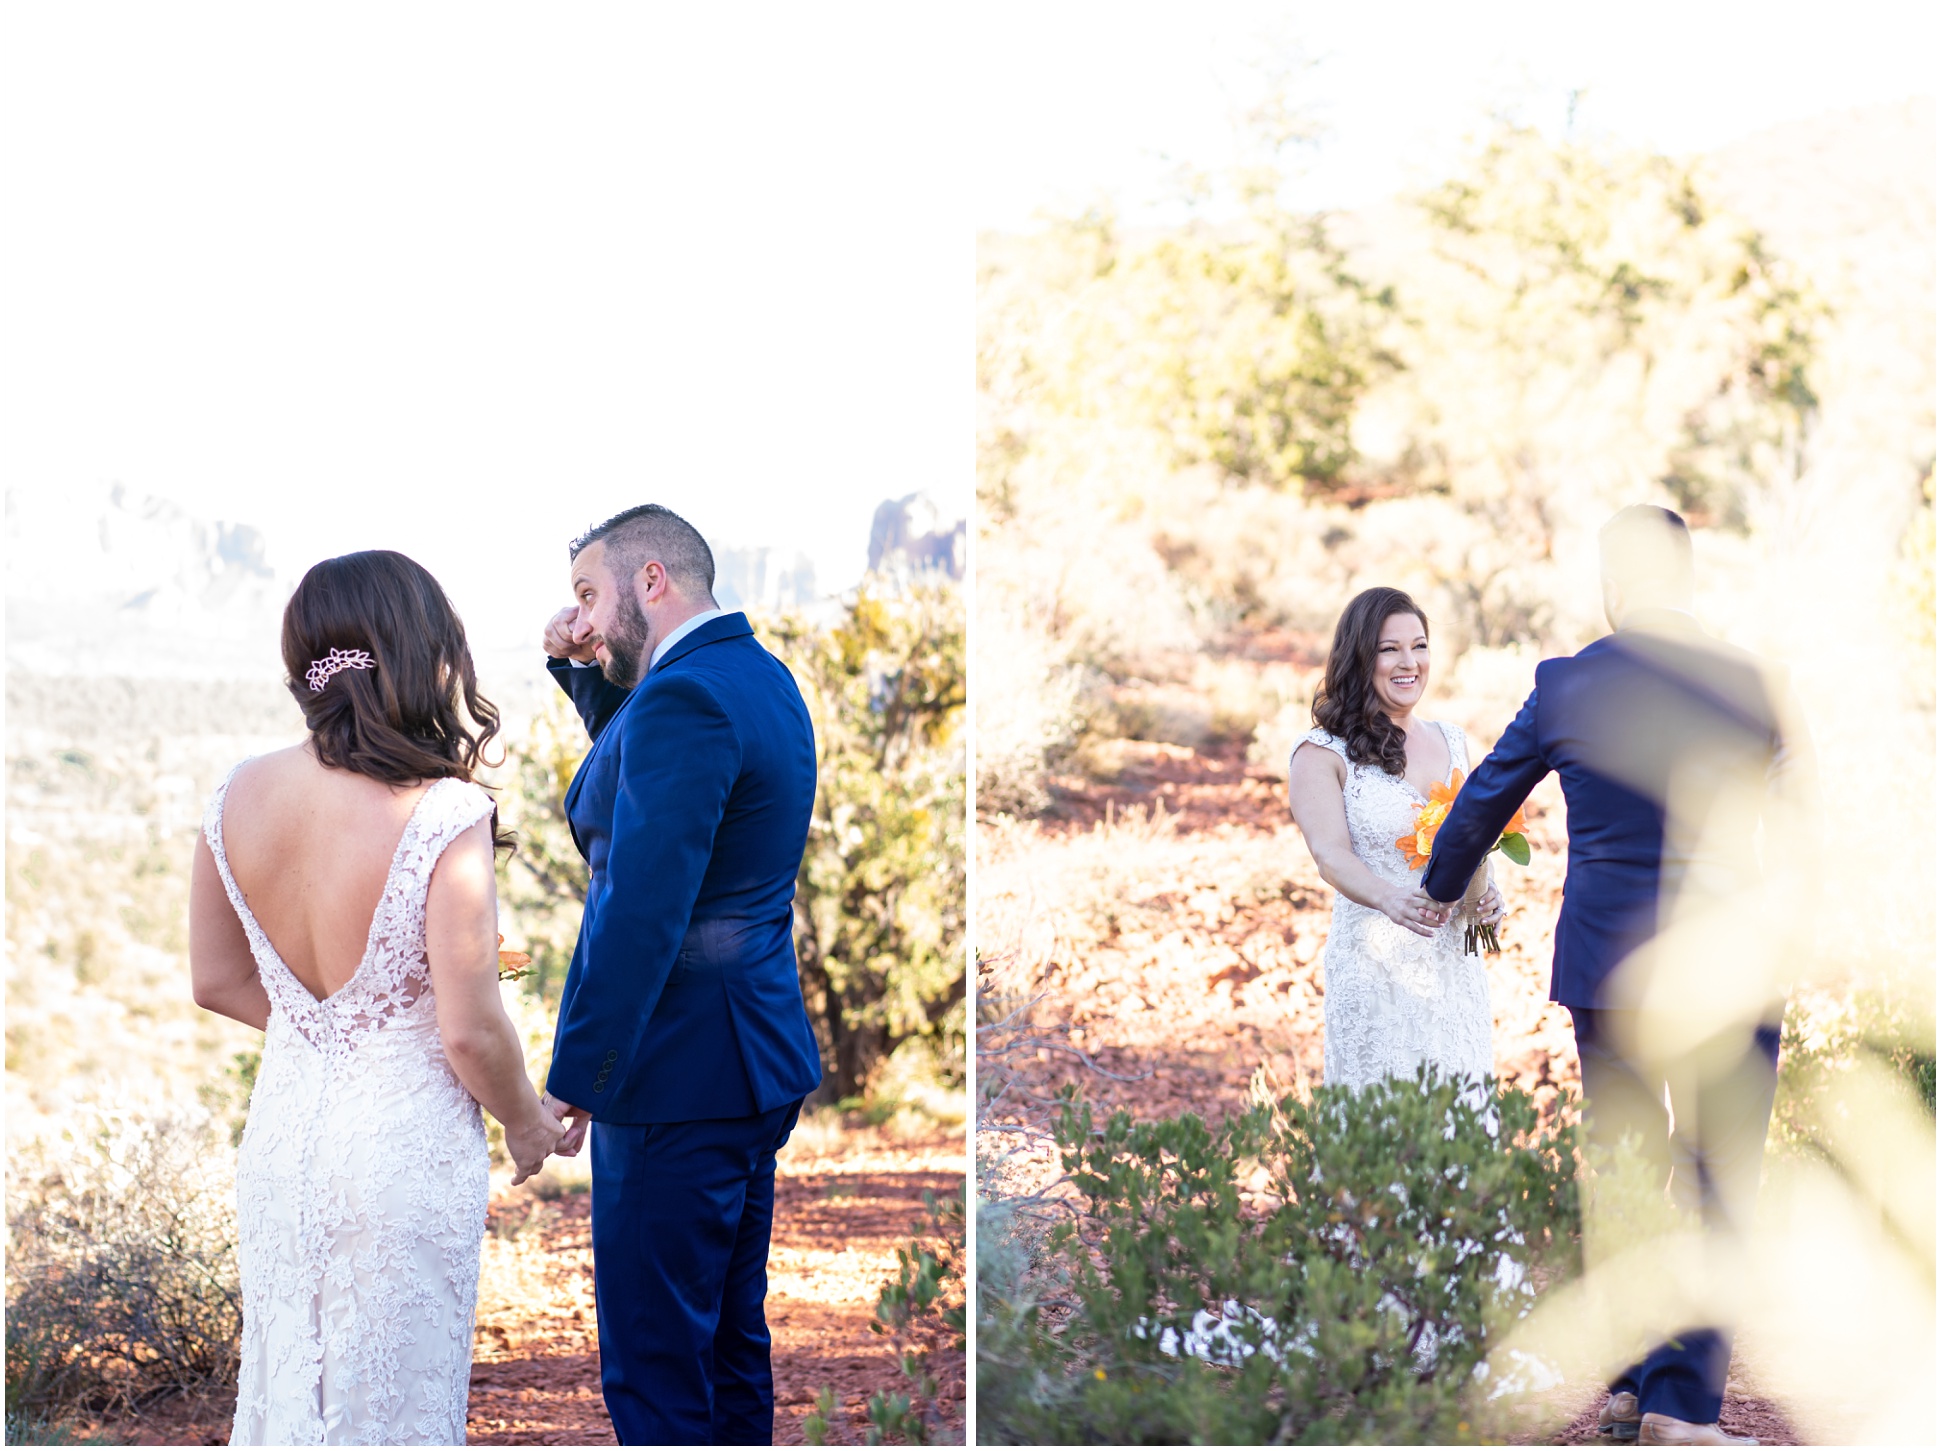 Tiffany and Anthony share their first look overlooking the Red Rocks in Sedona